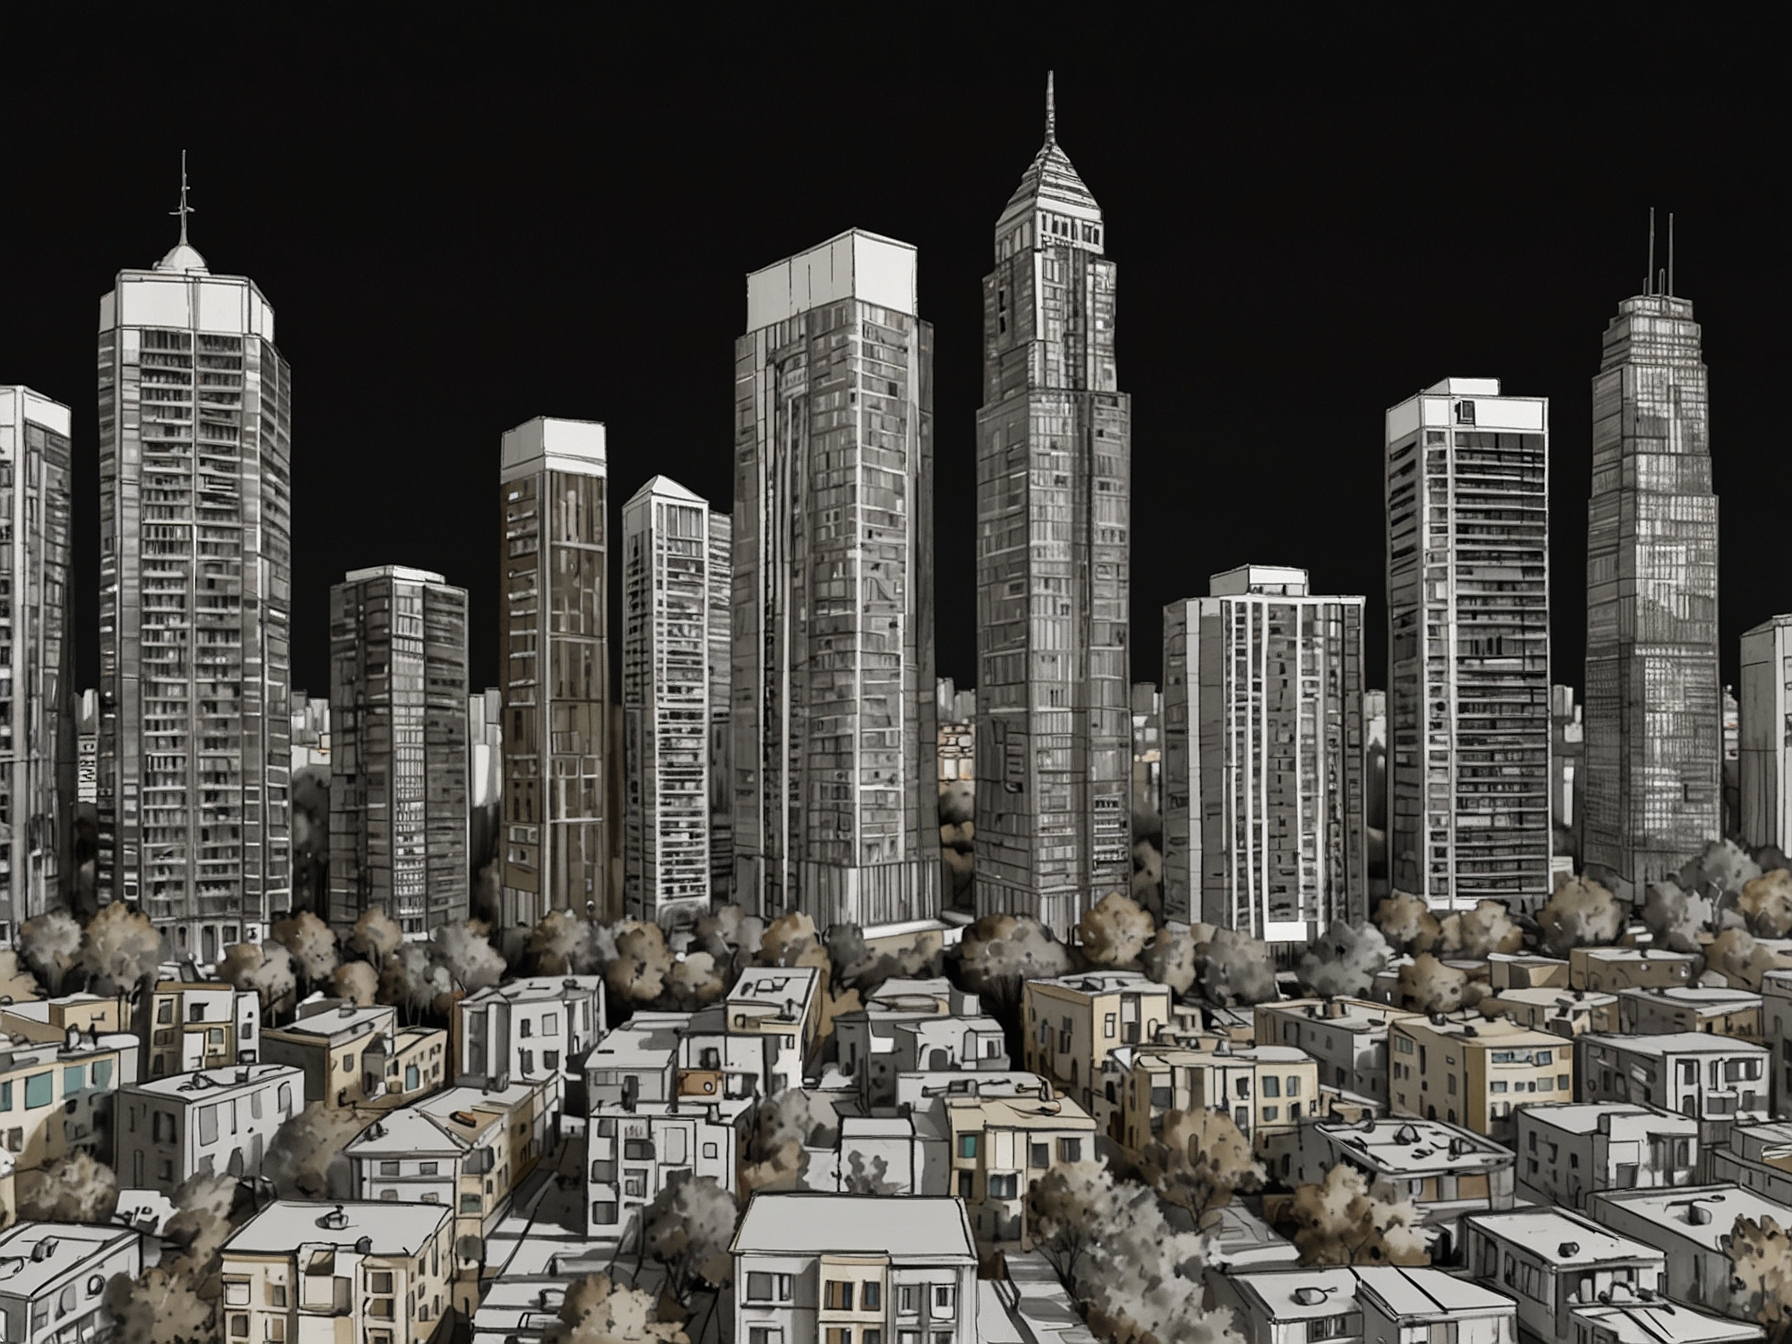 A cityscape showing a blend of high-rise buildings and affordable housing units to depict zoning inclusiveness.